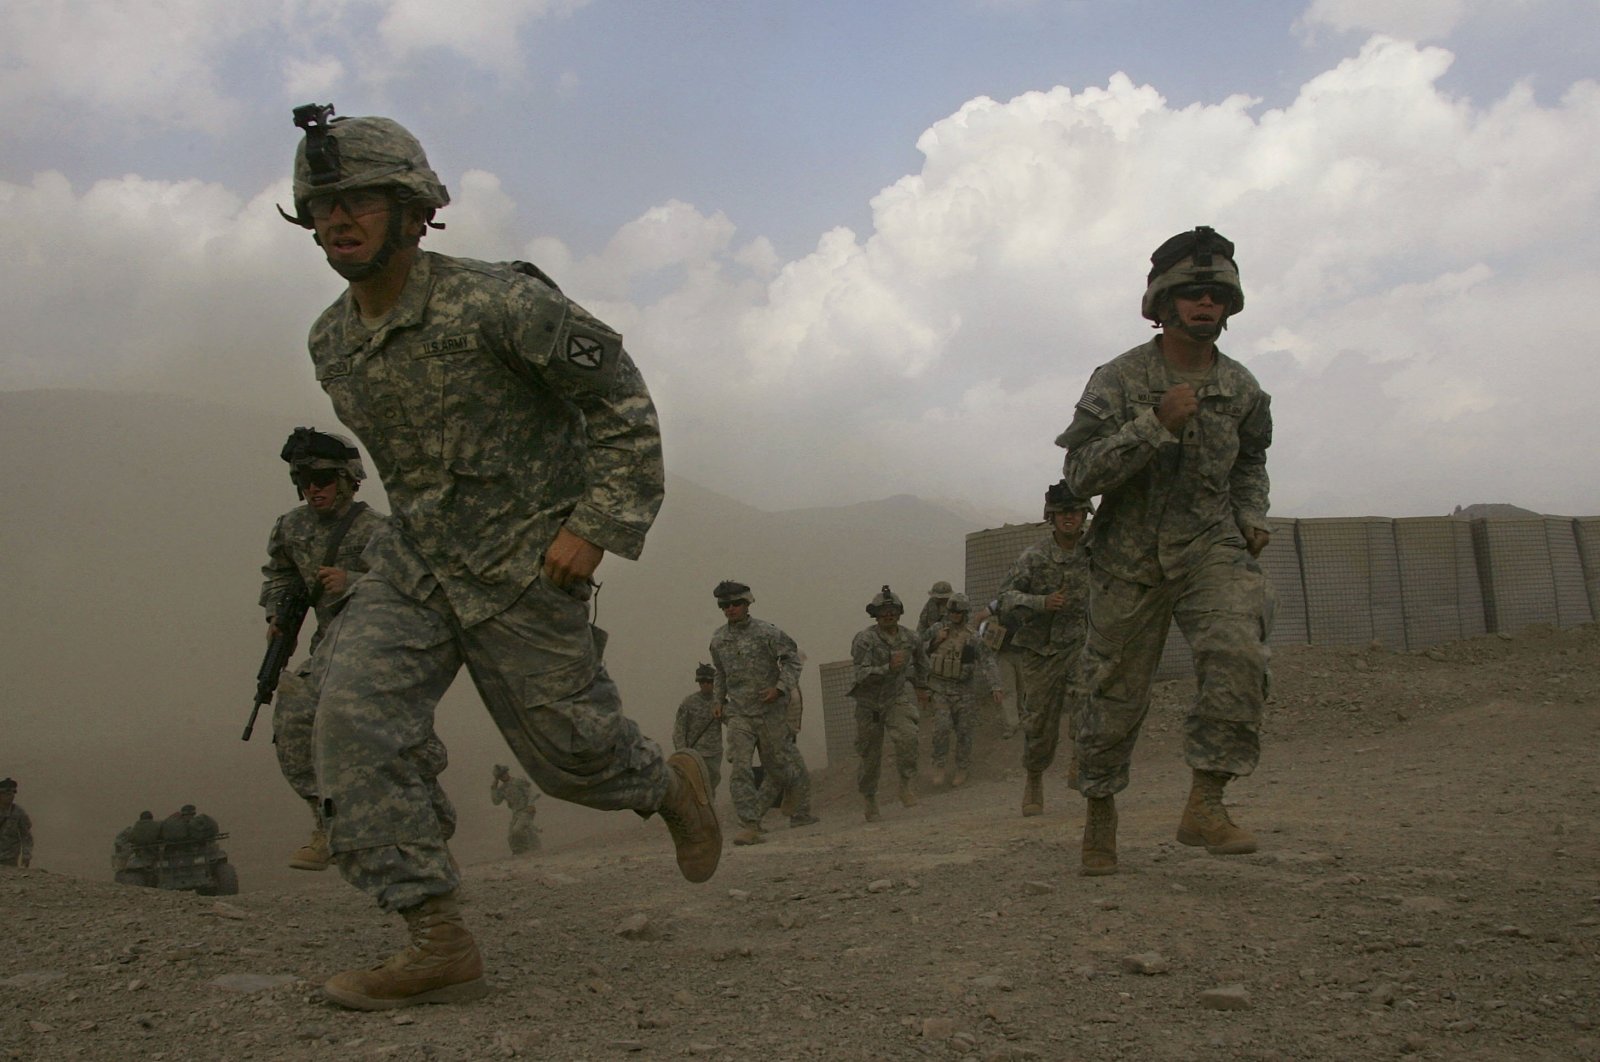 U.S. soldiers run to quickly unload a supply helicopter between Taliban rocket attacks, at Camp Tillman in the Paktika province of eastern Afghanistan, Oct. 24, 2006. (Photo by Getty Images)